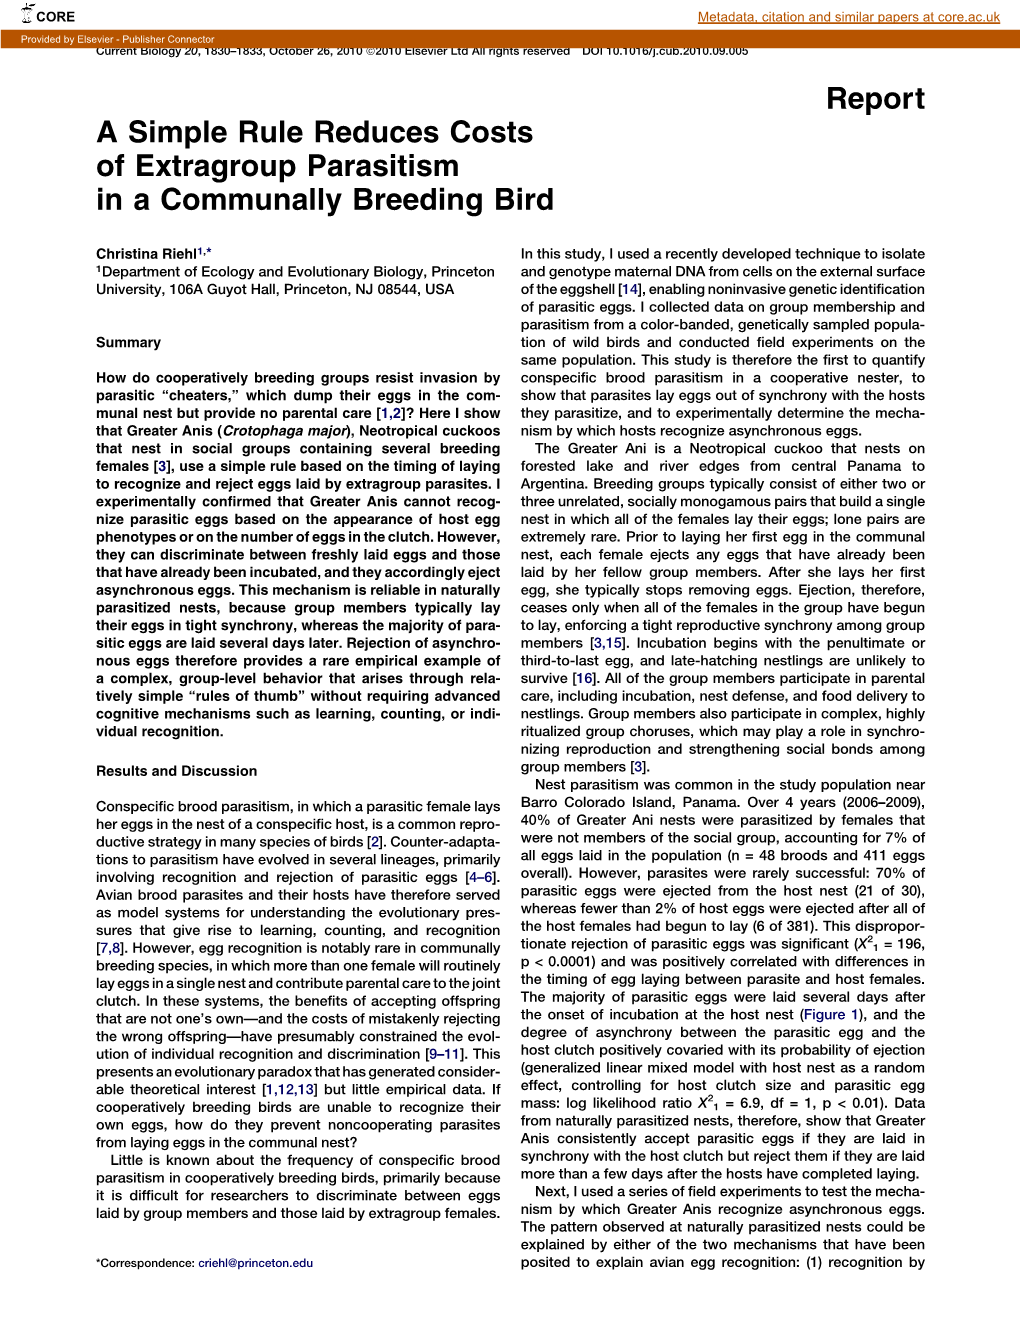 A Simple Rule Reduces Costs of Extragroup Parasitism in a Communally Breeding Bird